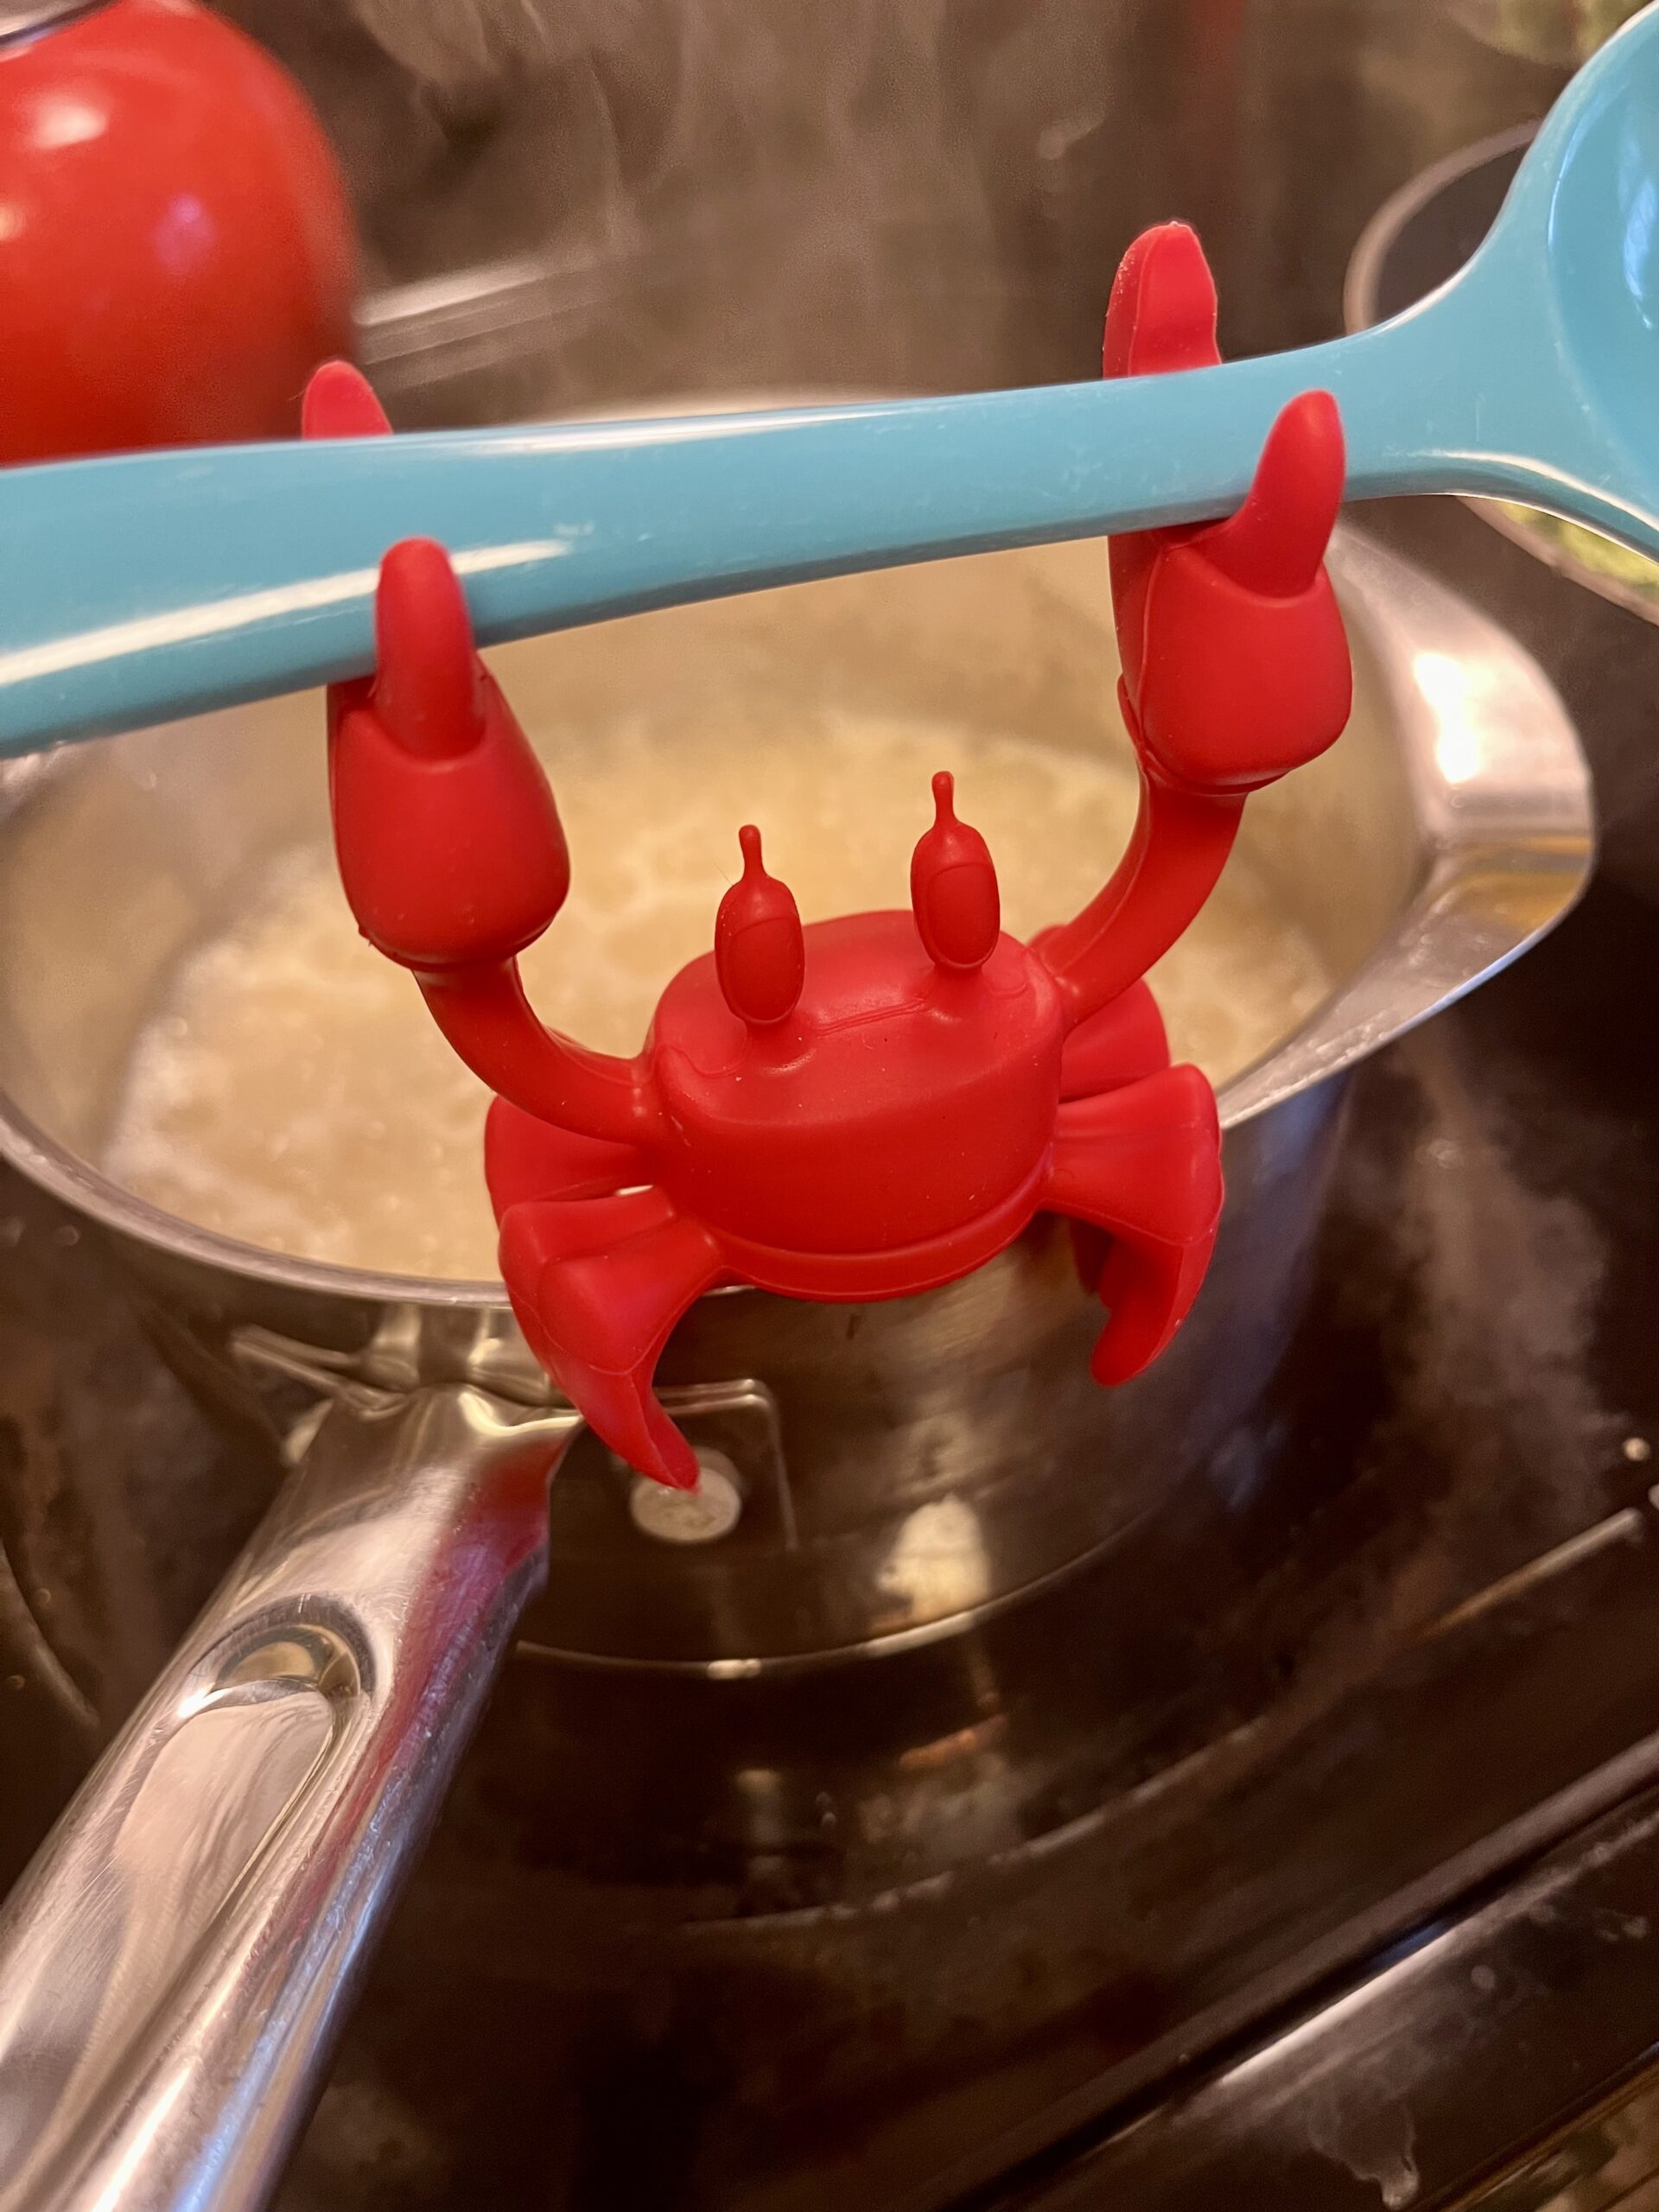 Meet Red the Crab, the Cutest Utensil Rest with 4000+ 5 Star Reviews!